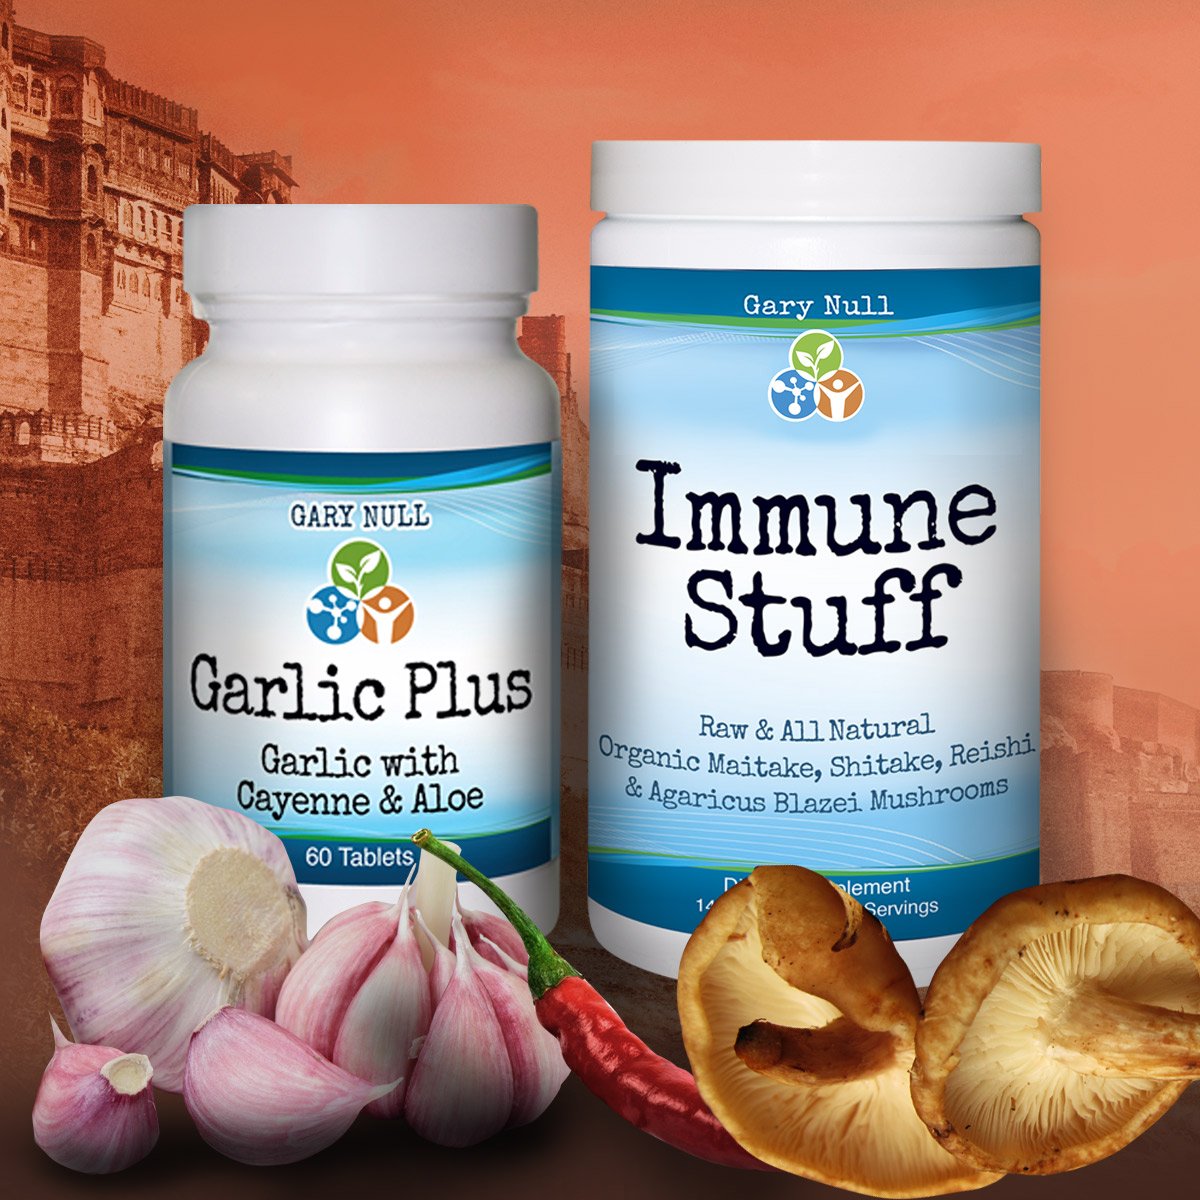 Power Up! Improve your Immune System